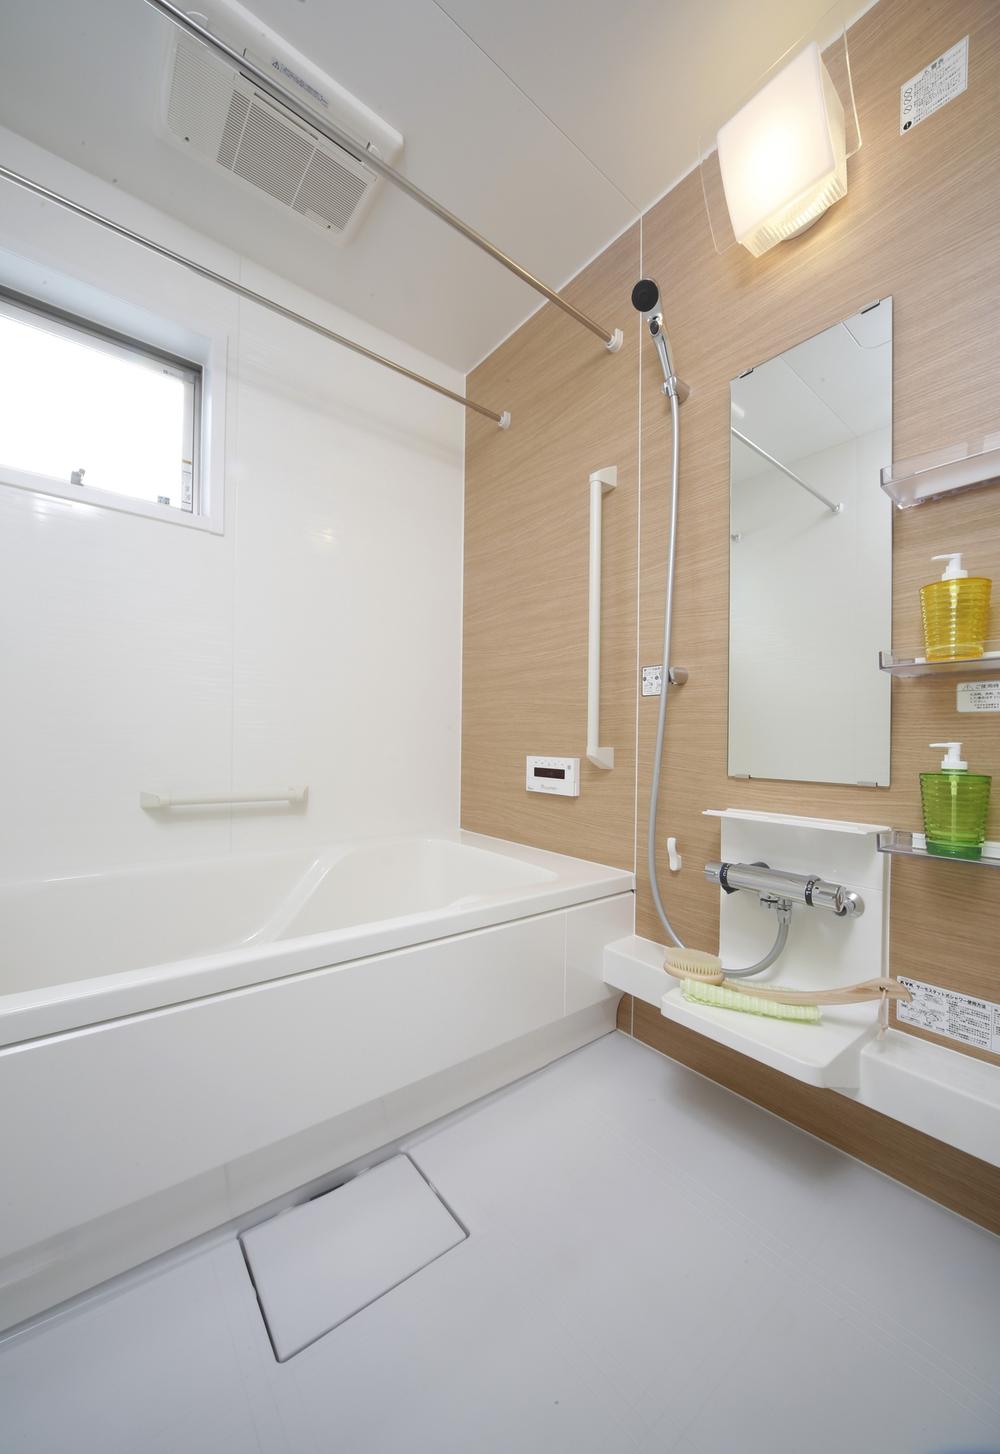 Bathroom. Model house (S-1 No. land) Bathroom that can be relaxed  ※ Sales already dwelling unit